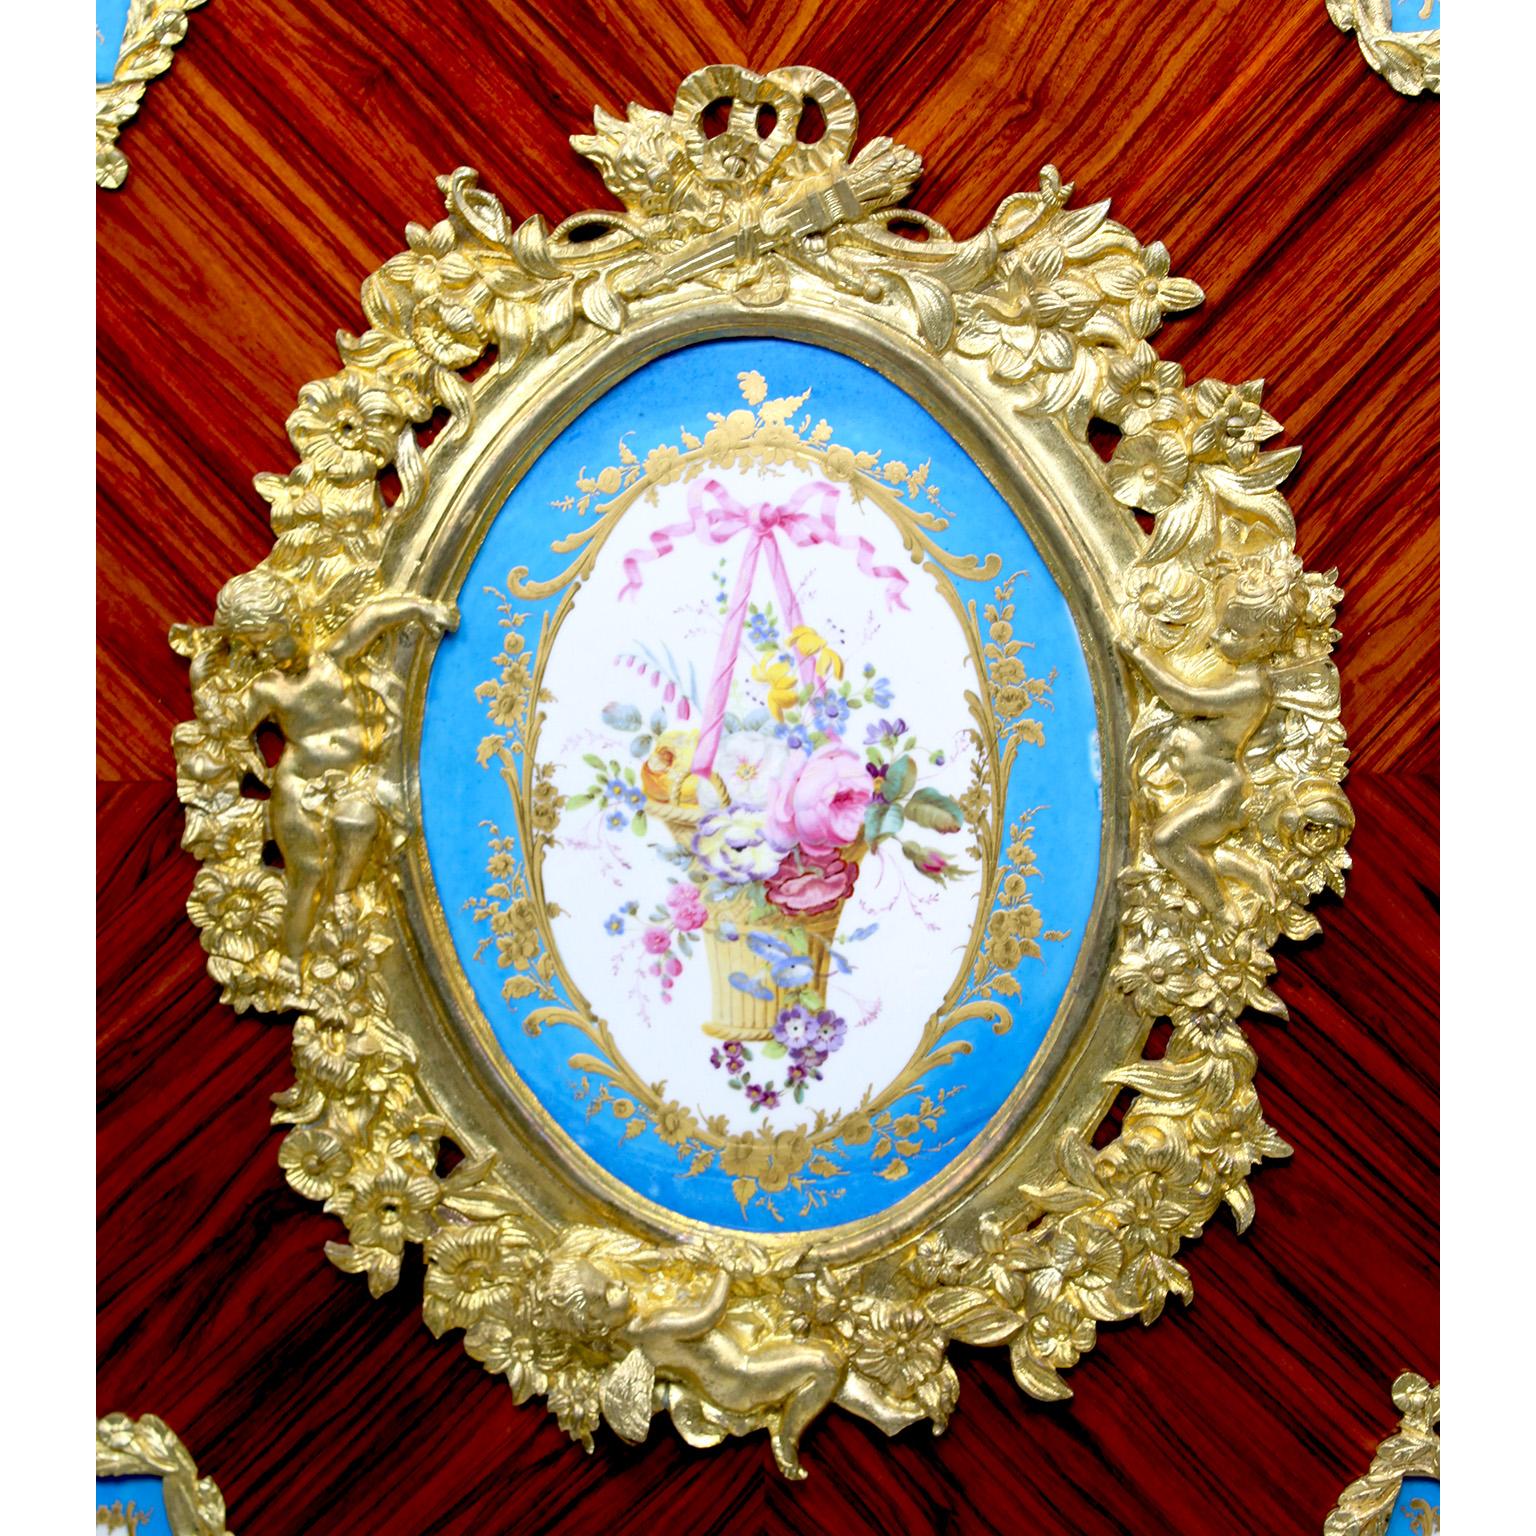 Gilt French Napoleon III Ormolu & Porcelain Mounted Cabinet Meuble D'Appui by Befort For Sale